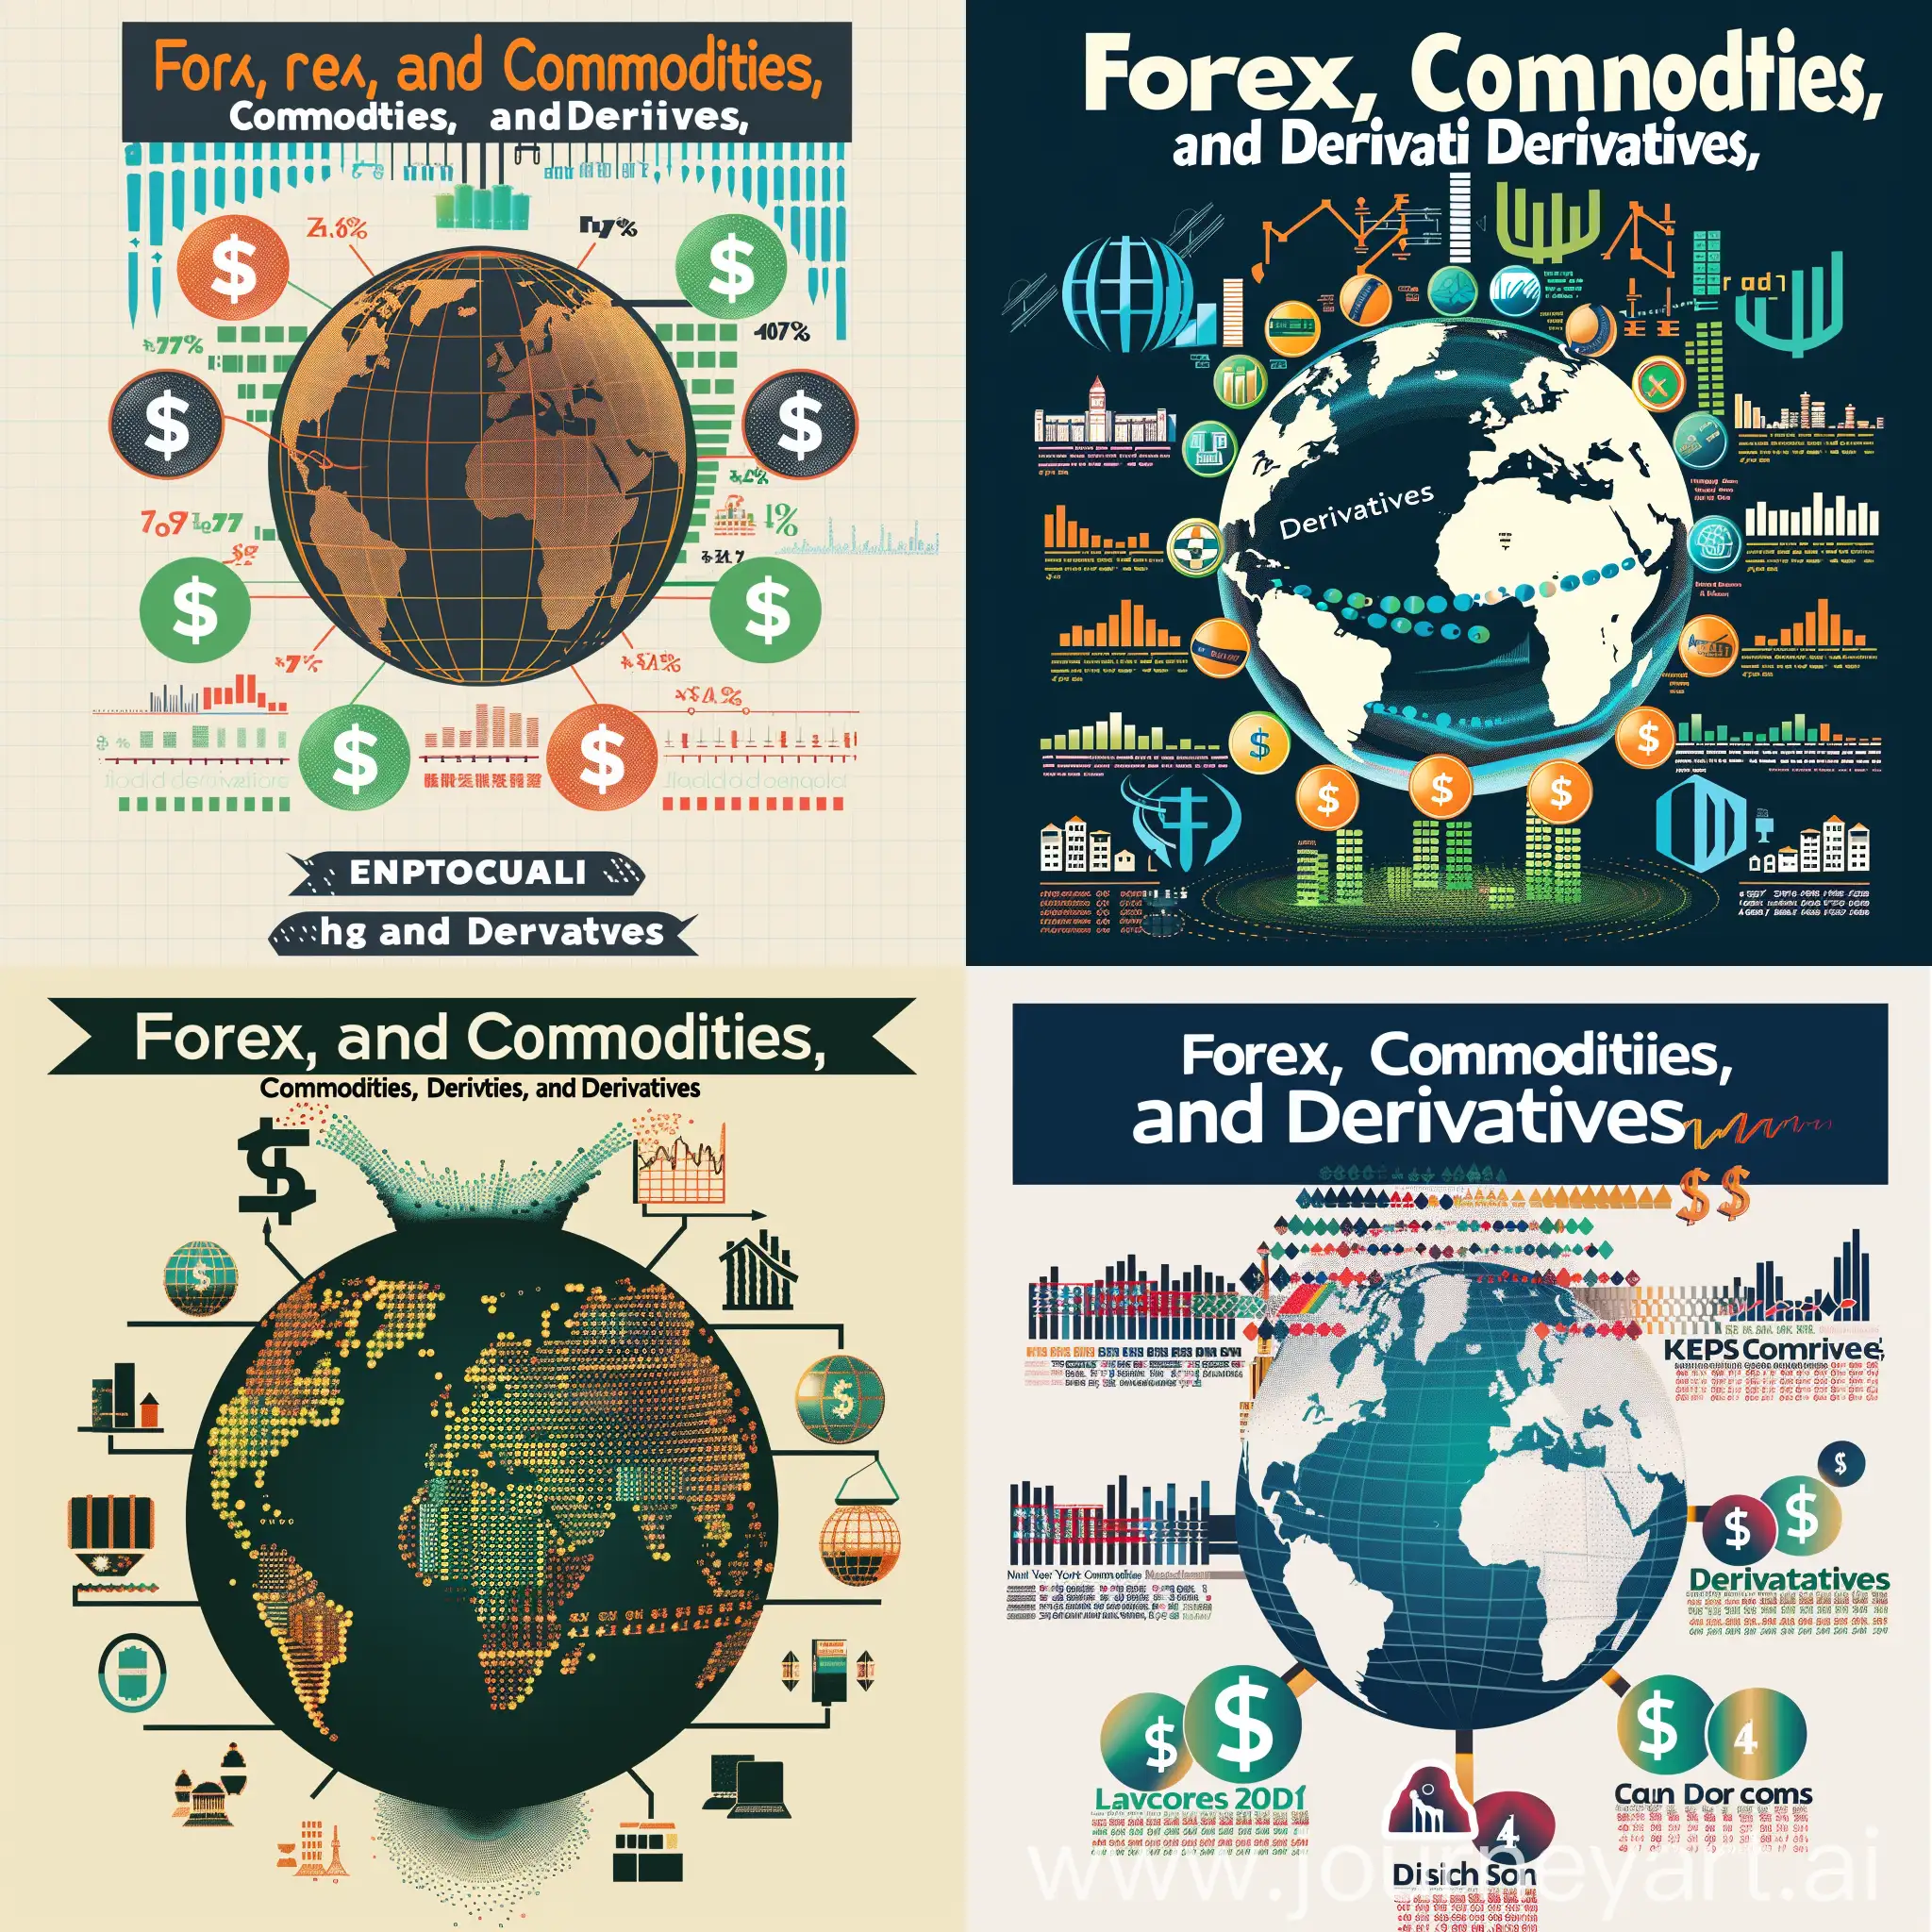 Dynamic-Forex-Commodities-and-Derivatives-Poster-with-Global-Financial-Centers-and-Bull-Market-Symbols